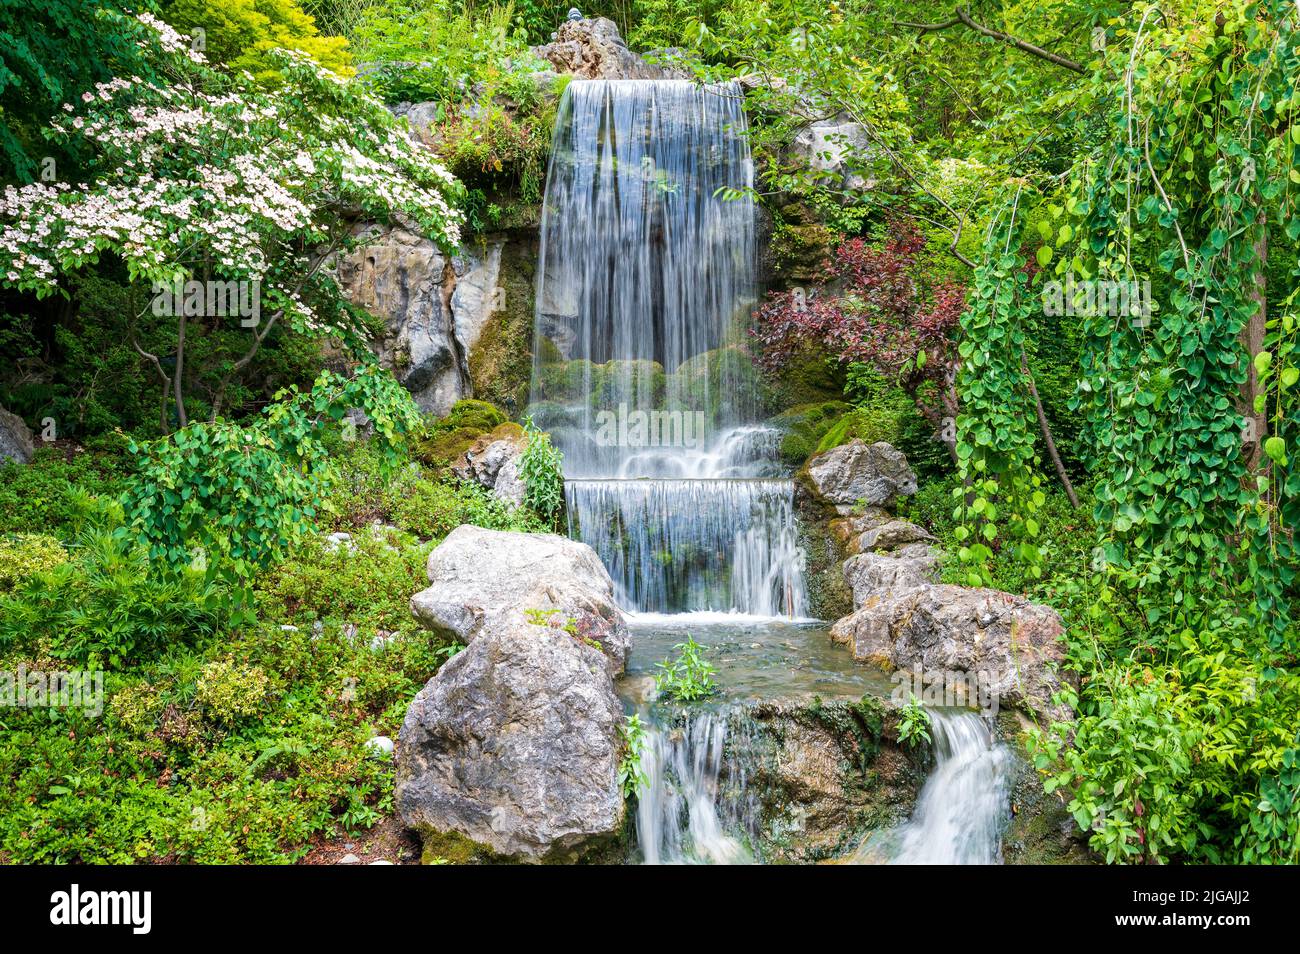 A beautiful view of flowing waterfall falling from rocks surrounded by blooming trees and flowers Stock Photo